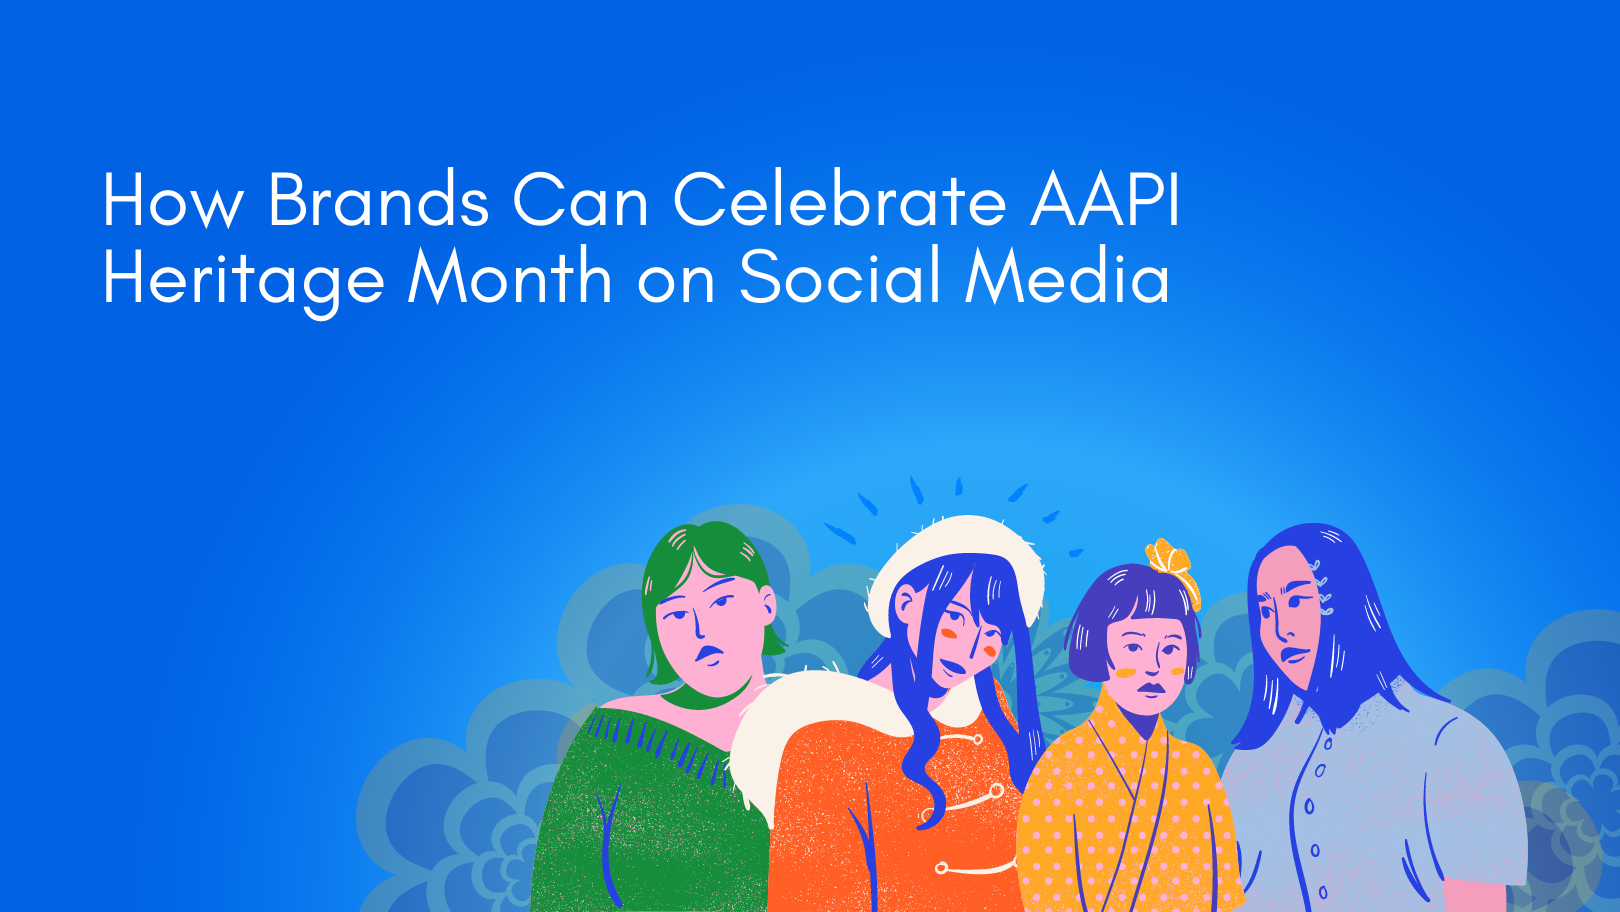 How Brands Can Celebrate AAPI Heritage Month on Social Media